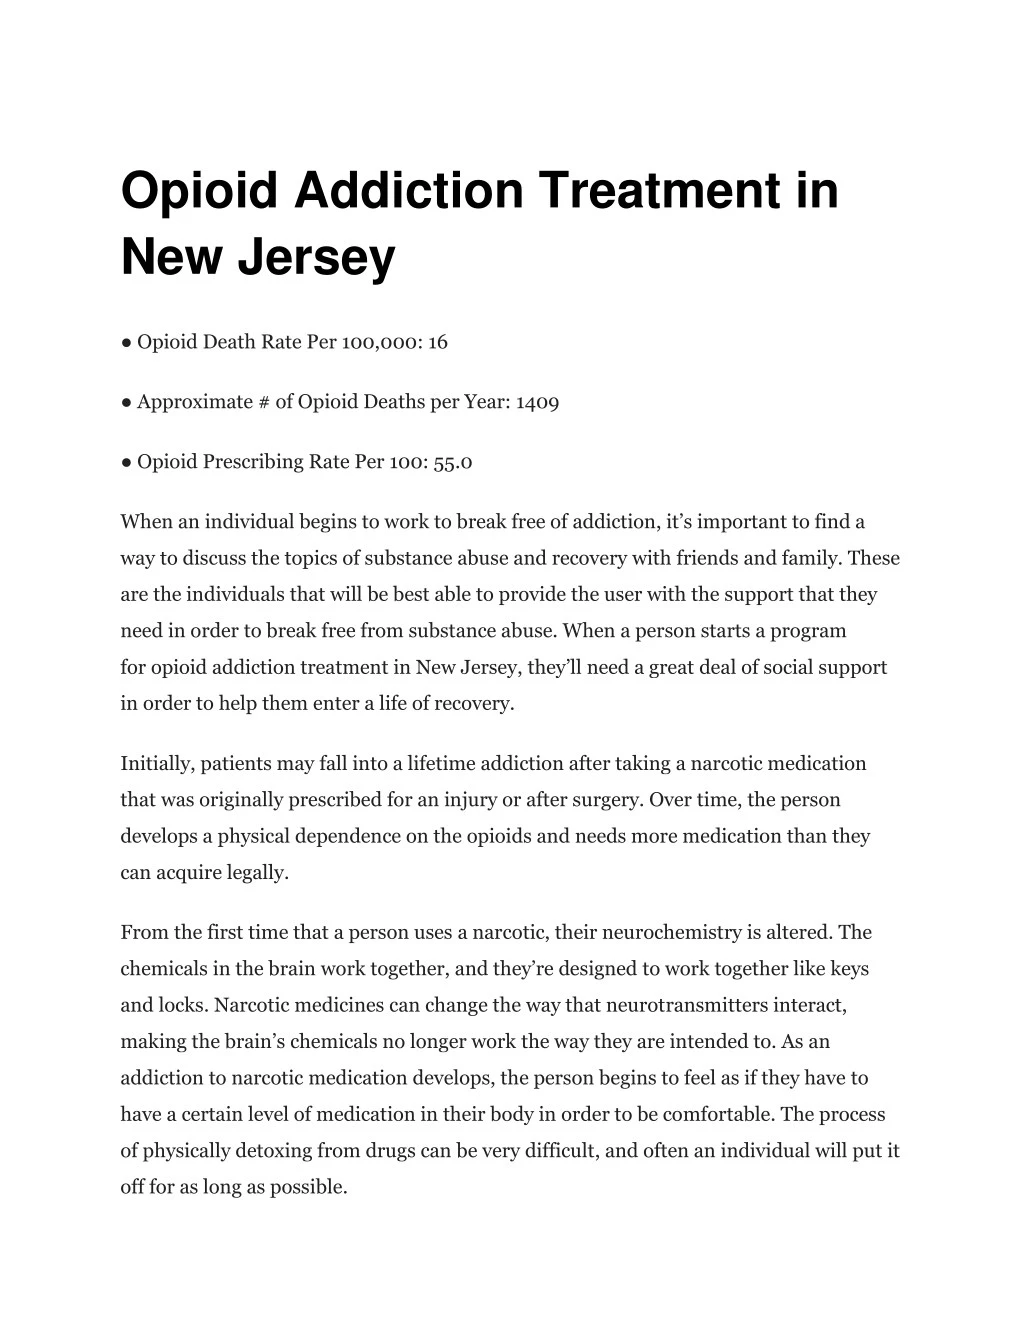 opioid addiction treatment in new jersey